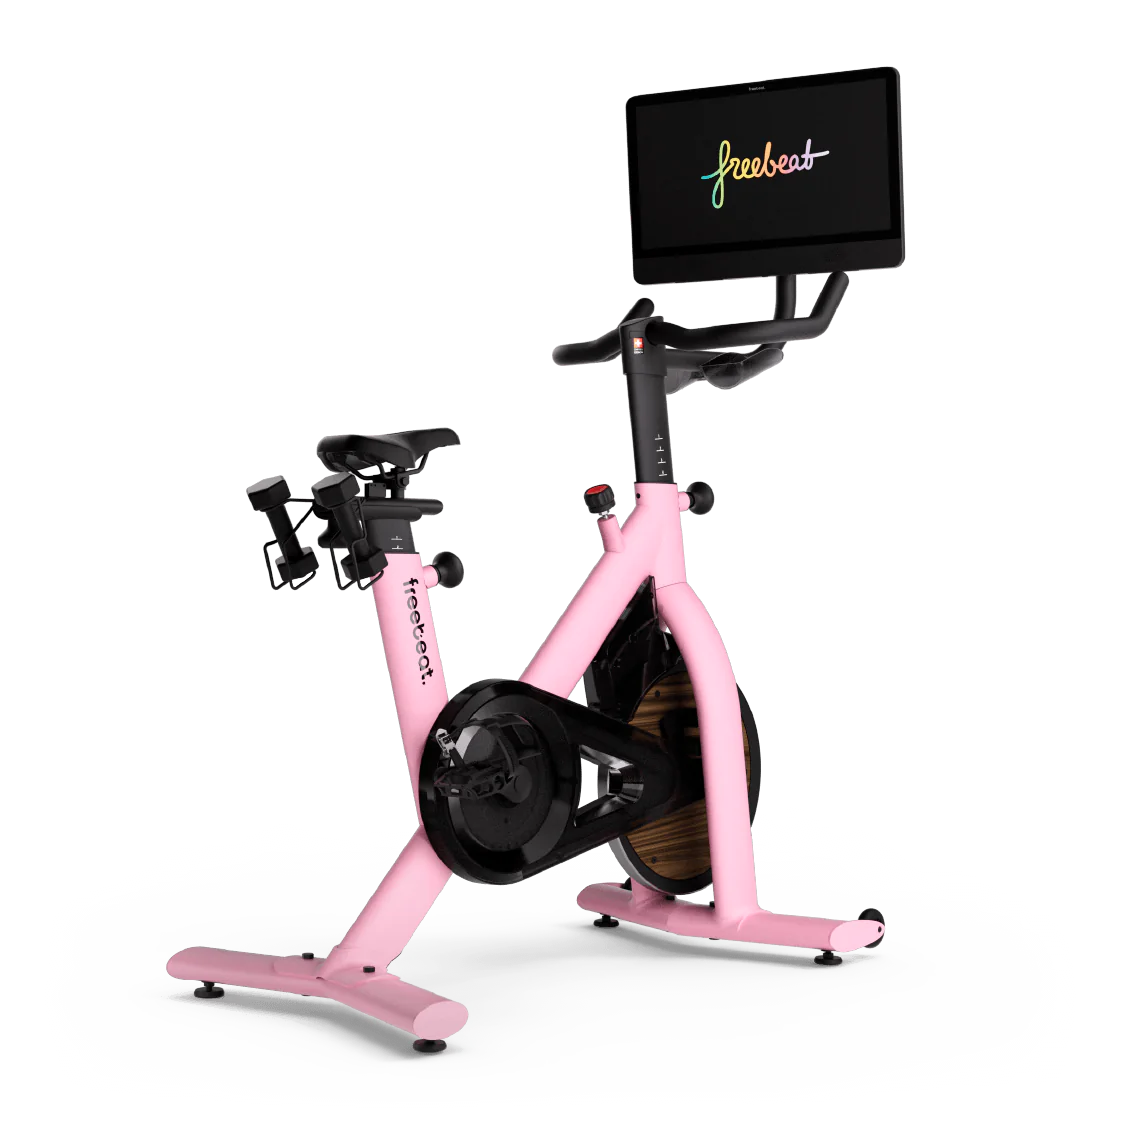 freebeat Lit Bike pink exercise bike with touchscreen